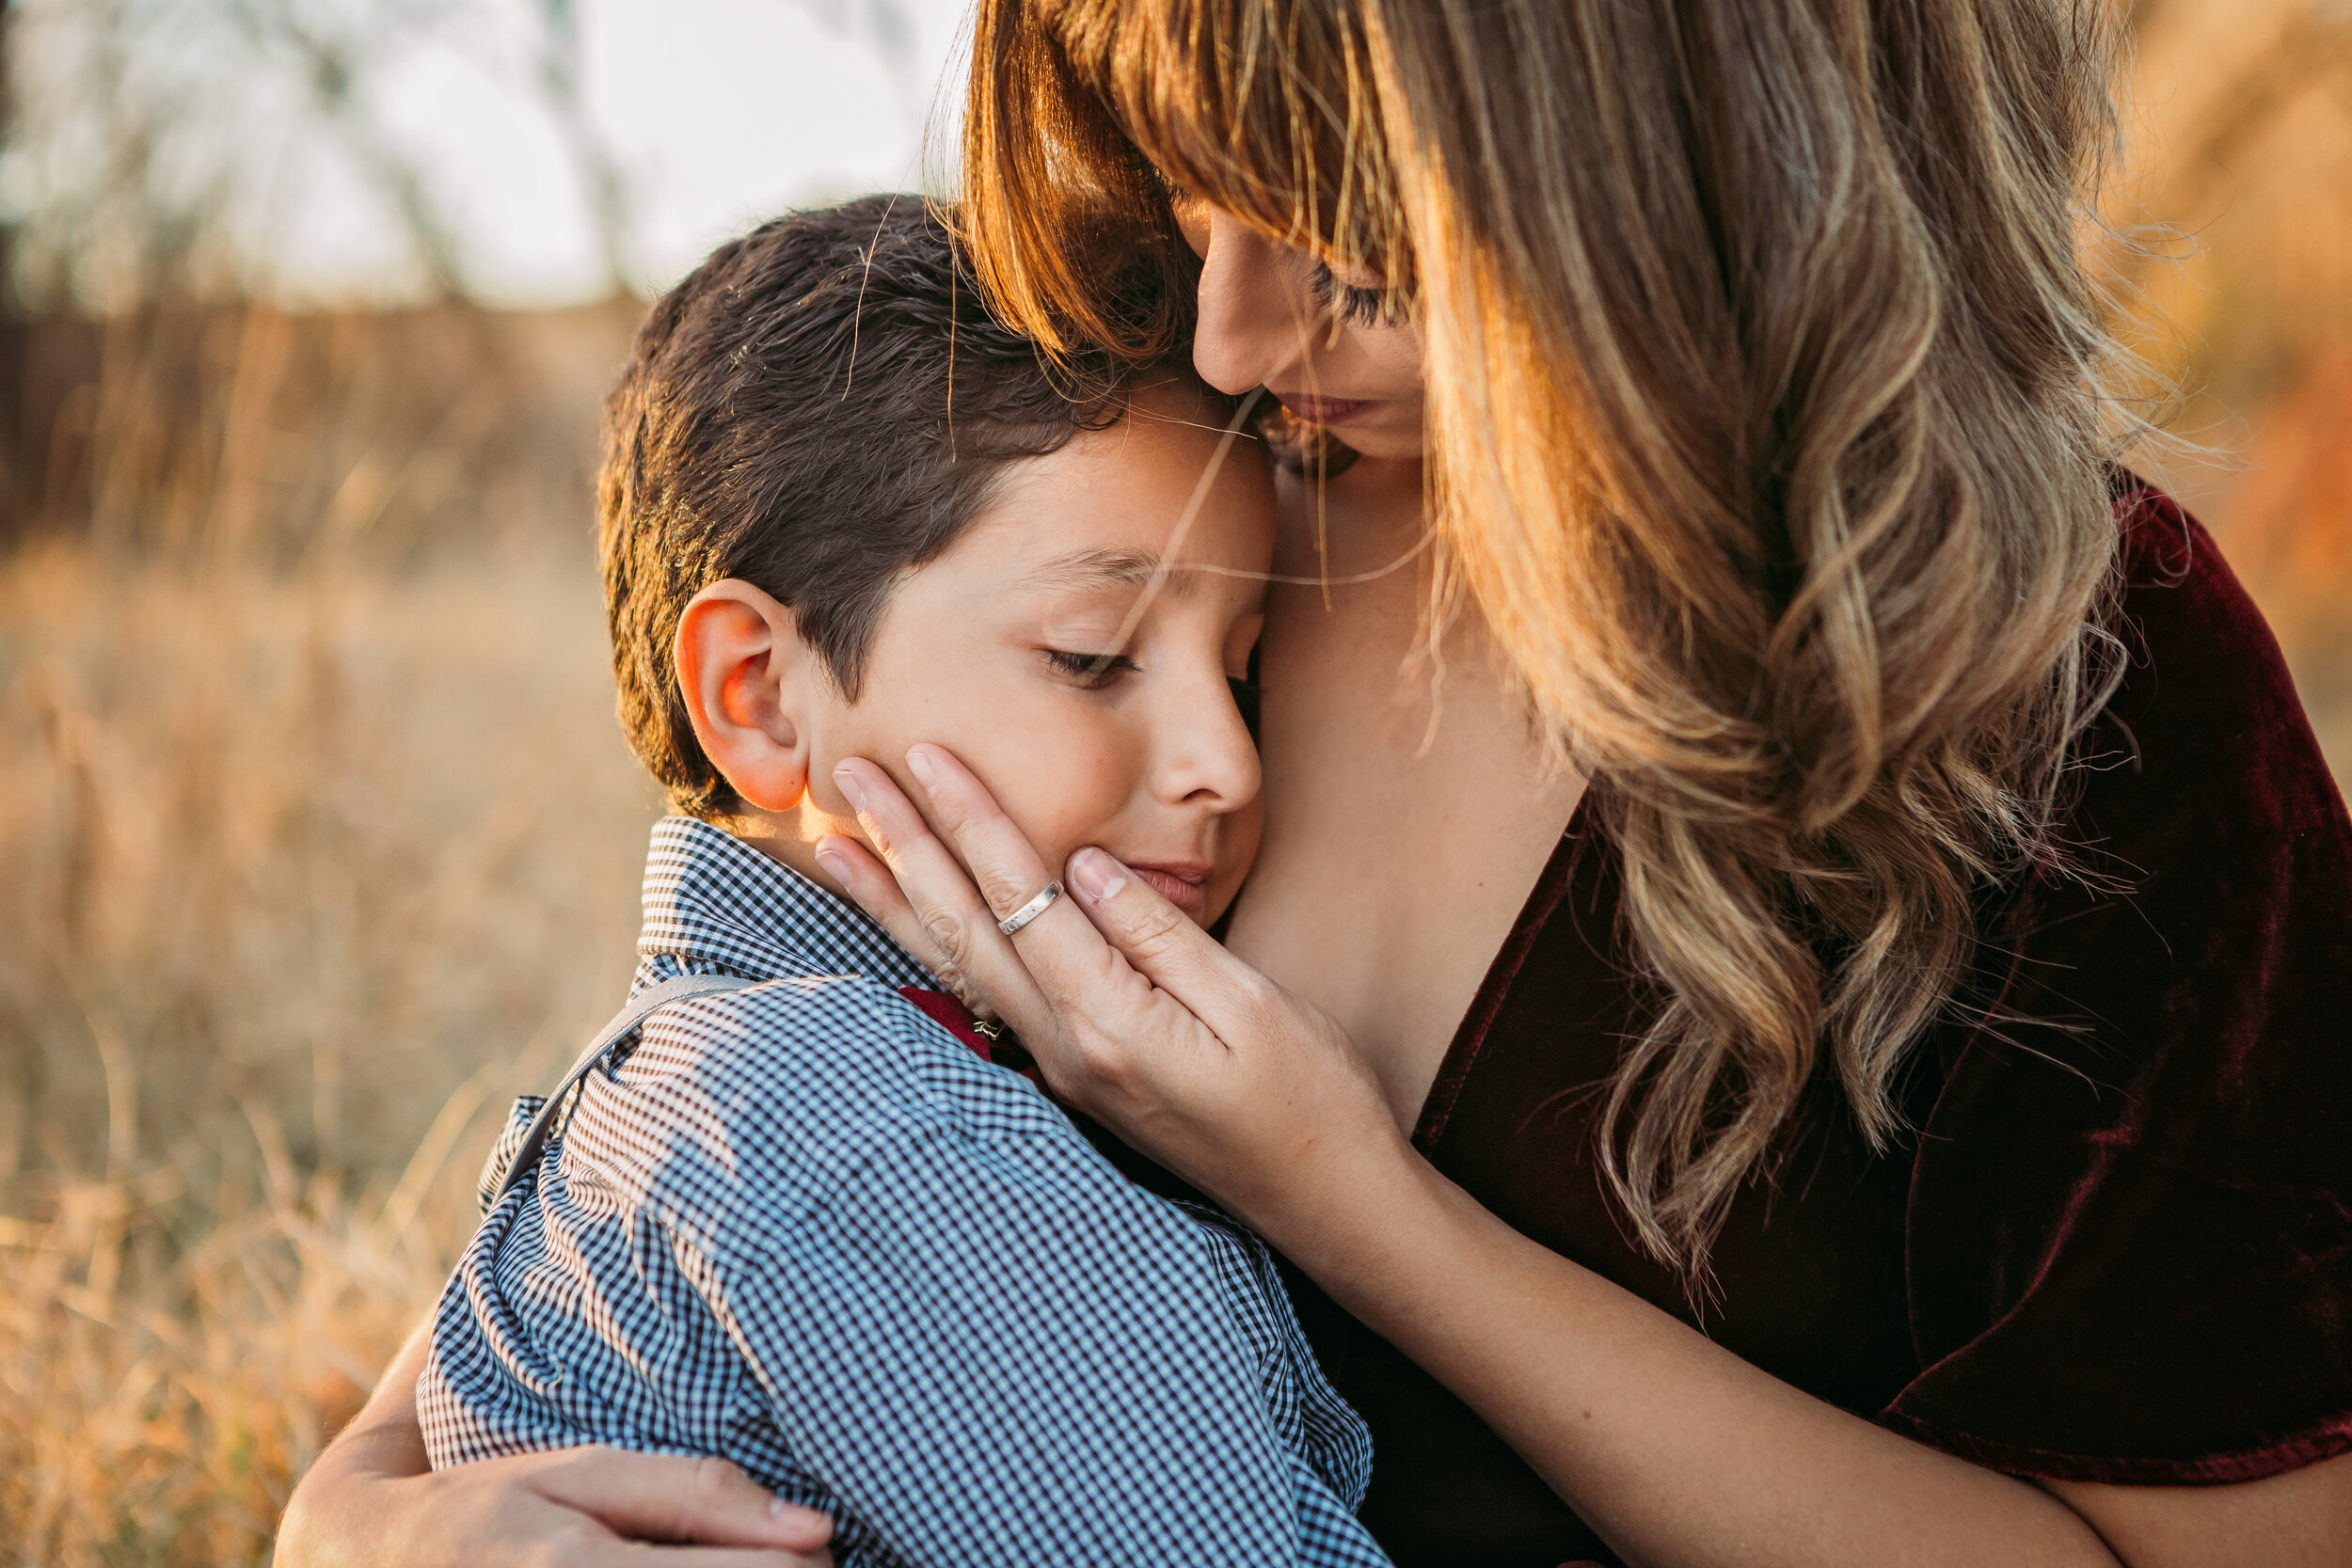  There is something special about a mother’s bond with her son. I loved that the shared so many sweet moments #tealawardphotography #texasfamilyphotographer #amarillophotographer #amarillofamilyphotographer #lifestylephotography #fallphotos #familyphotoshoot #family #lovingsiblings #families #familyphotos #naturalfamilyinteraction 